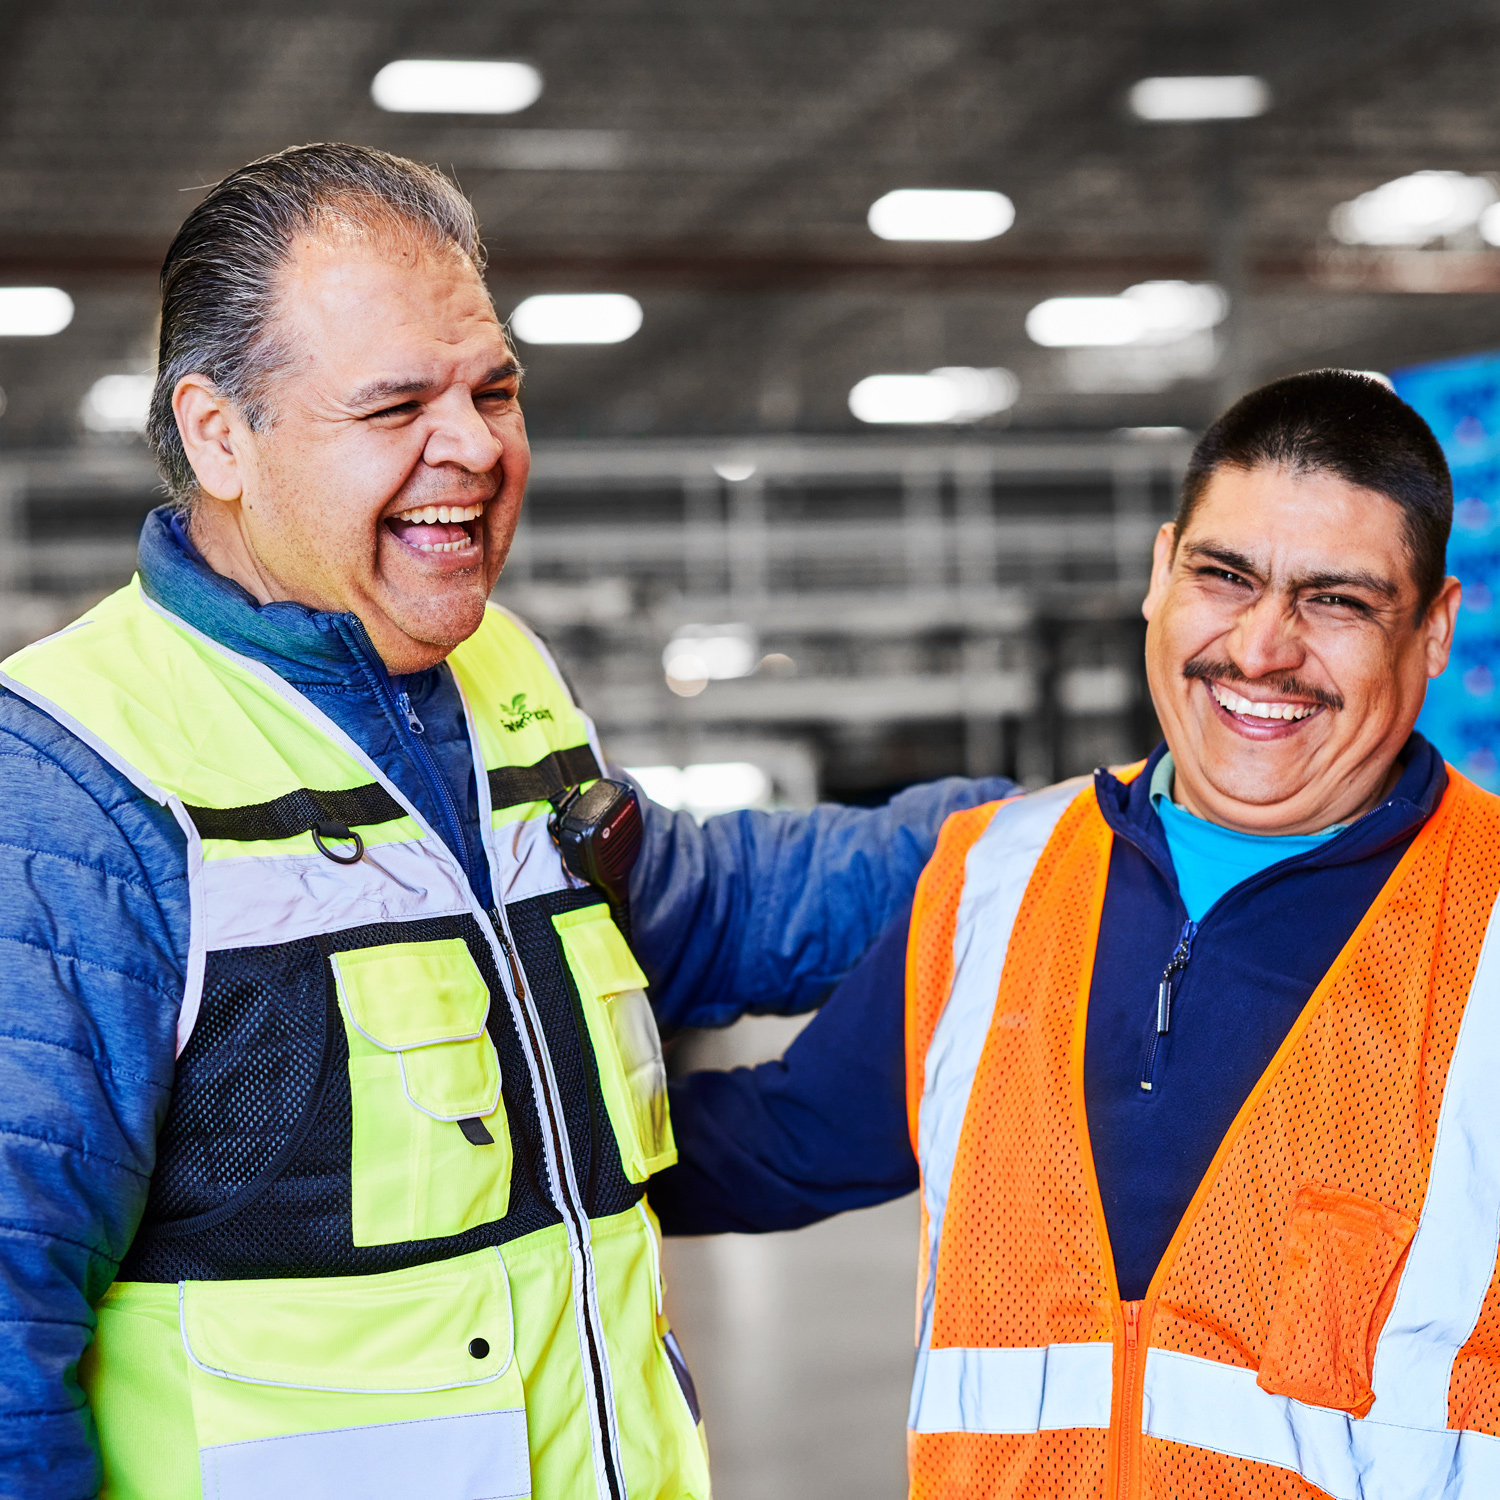 Two men wearing neon work vests are standing and laughing together in a factory